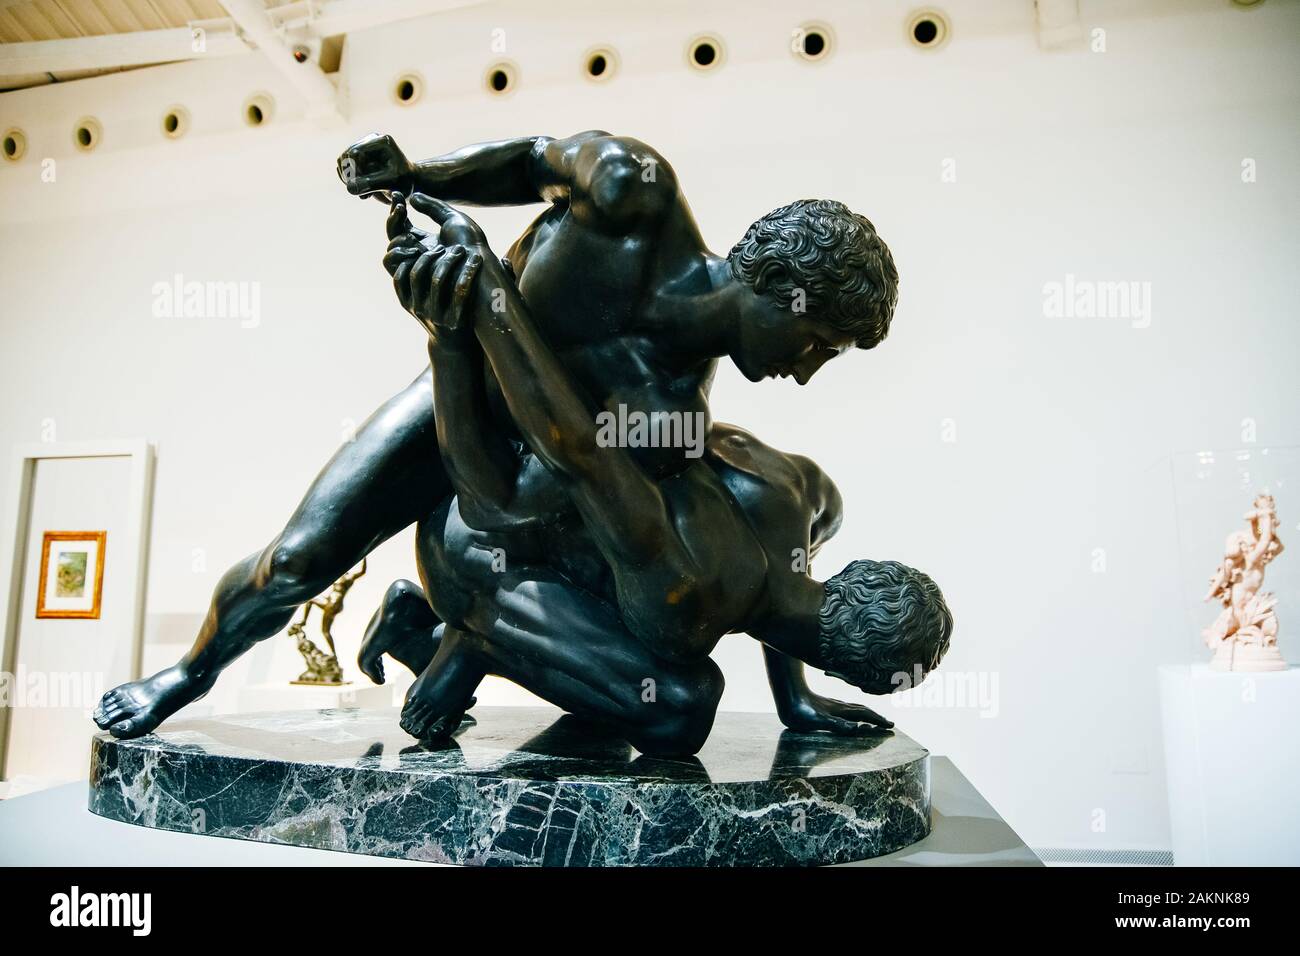 Mexico, Mexico city - june, 2019 inside in The modern Soumaya art museum Stock Photo